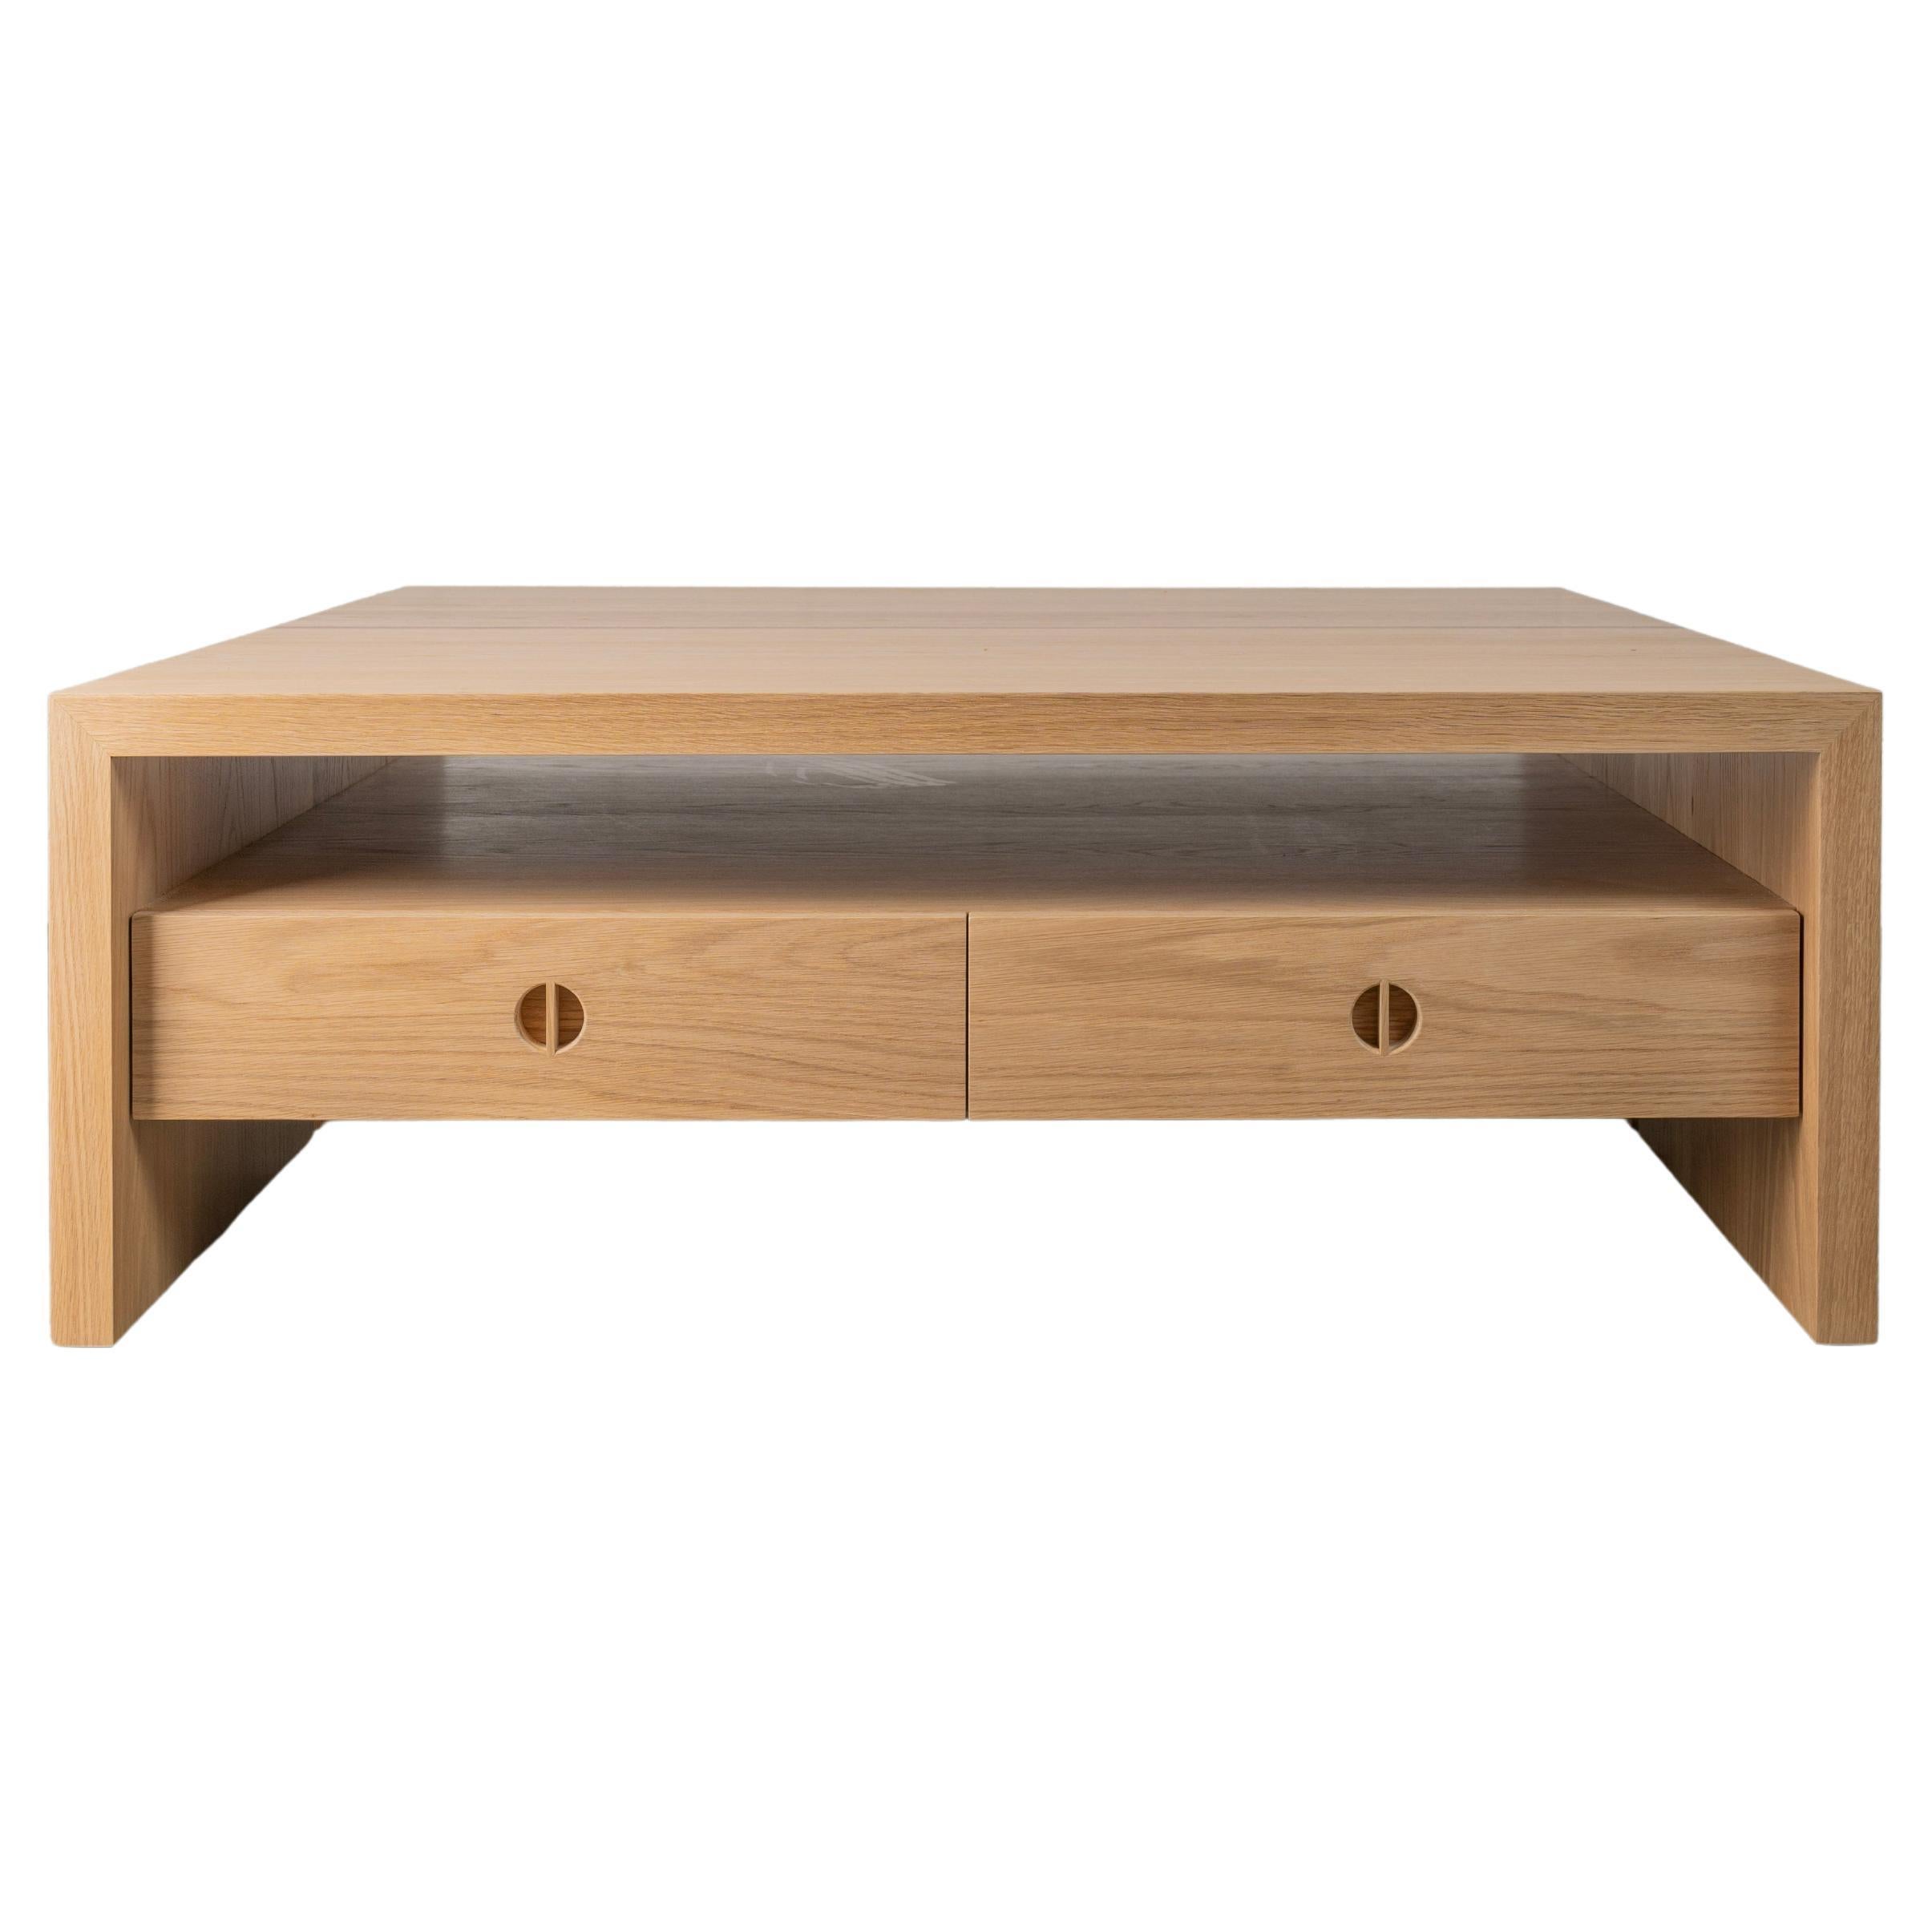 4 Drawer Jameson Coffee Table, Solid Oak and Walnut by Lynnea Jean For Sale